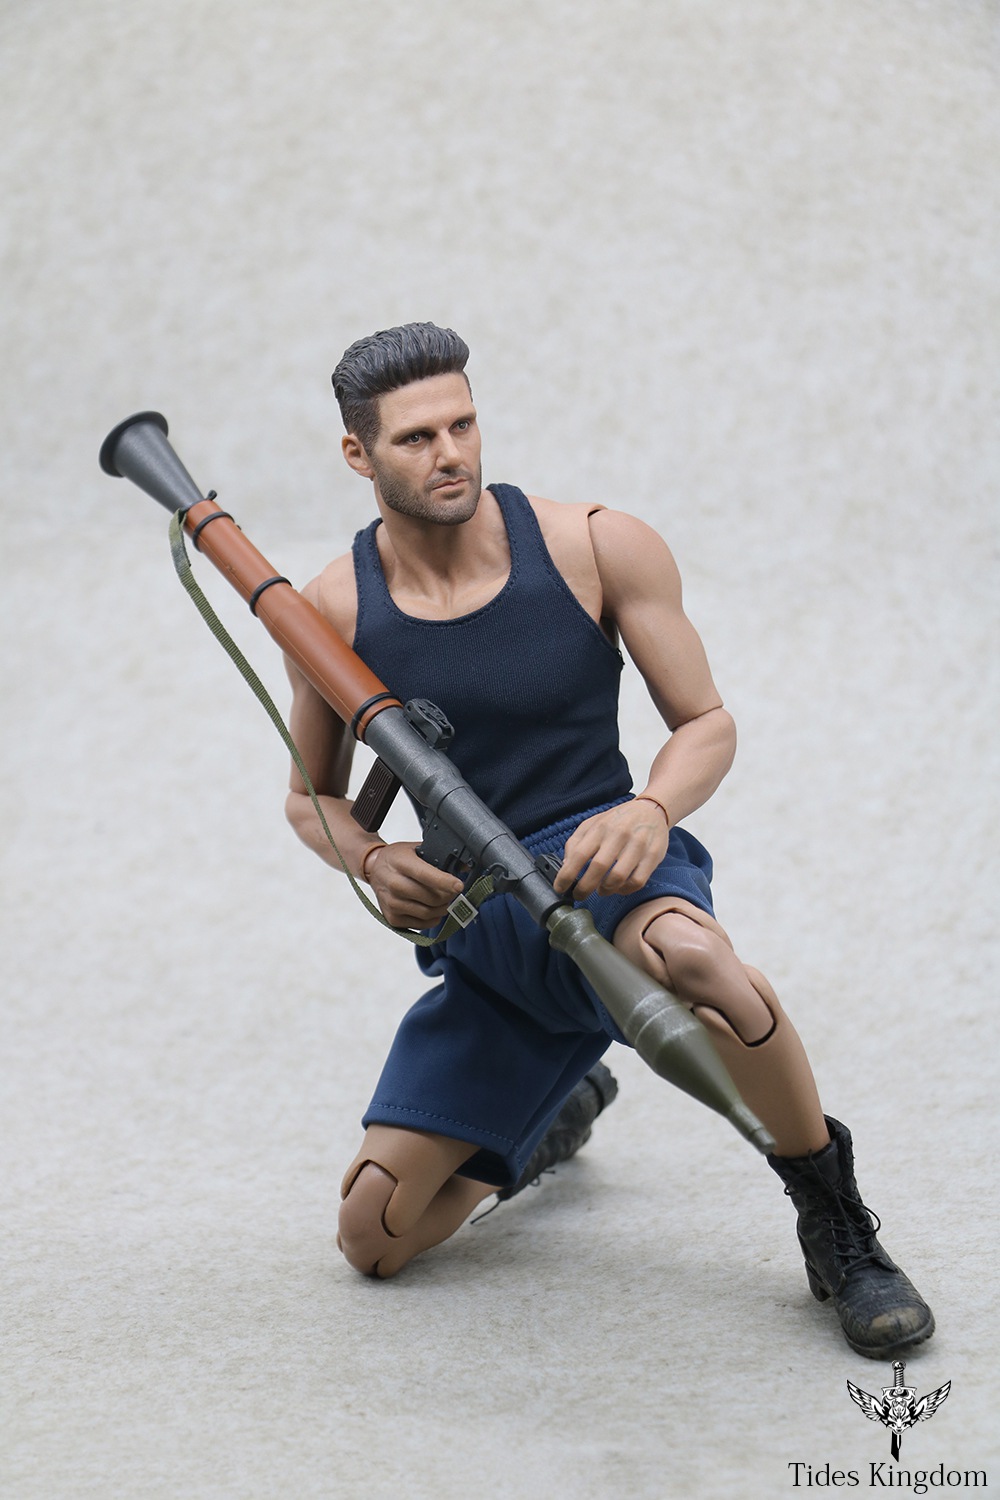 NEW PRODUCT: Tides Kingdom: Wolf Warriors 2 Papa Brock Rumlow 1/6 action figure A67dbd10